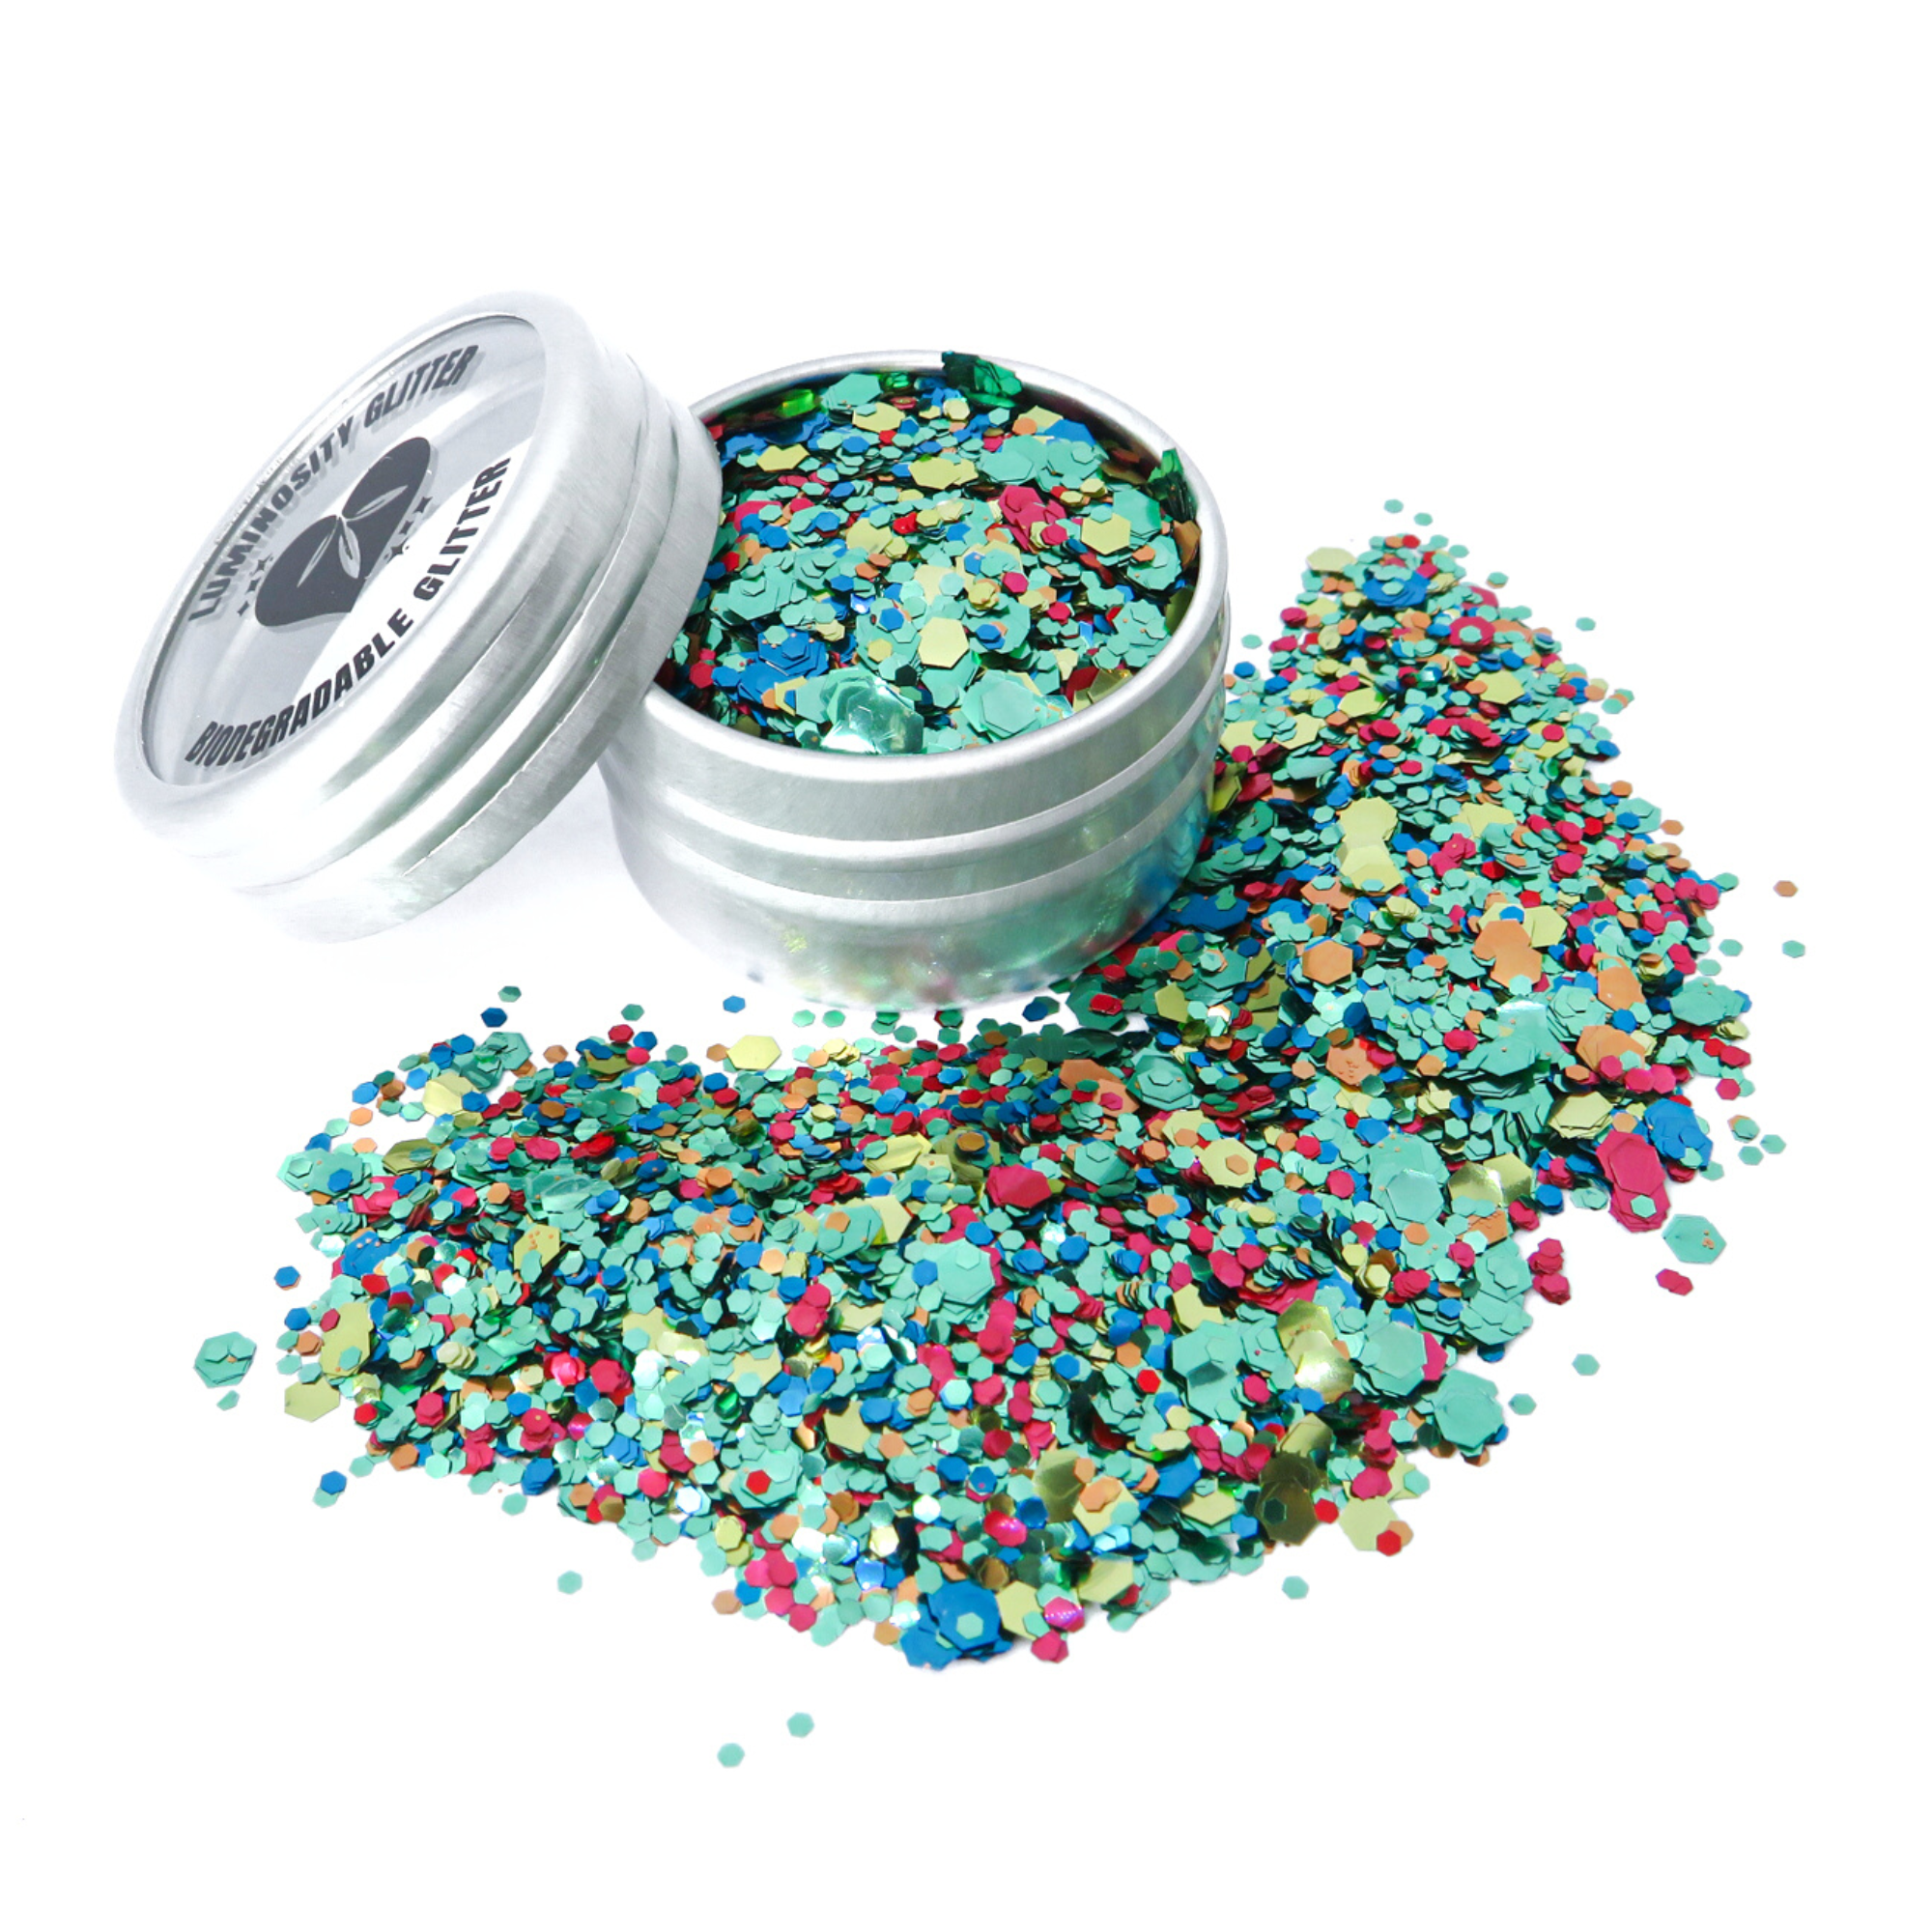 Chameleon eco glitter blend in a 10ml aluminium pot. Green, red, blue, orange and gold eco friendly glitter for face and body.